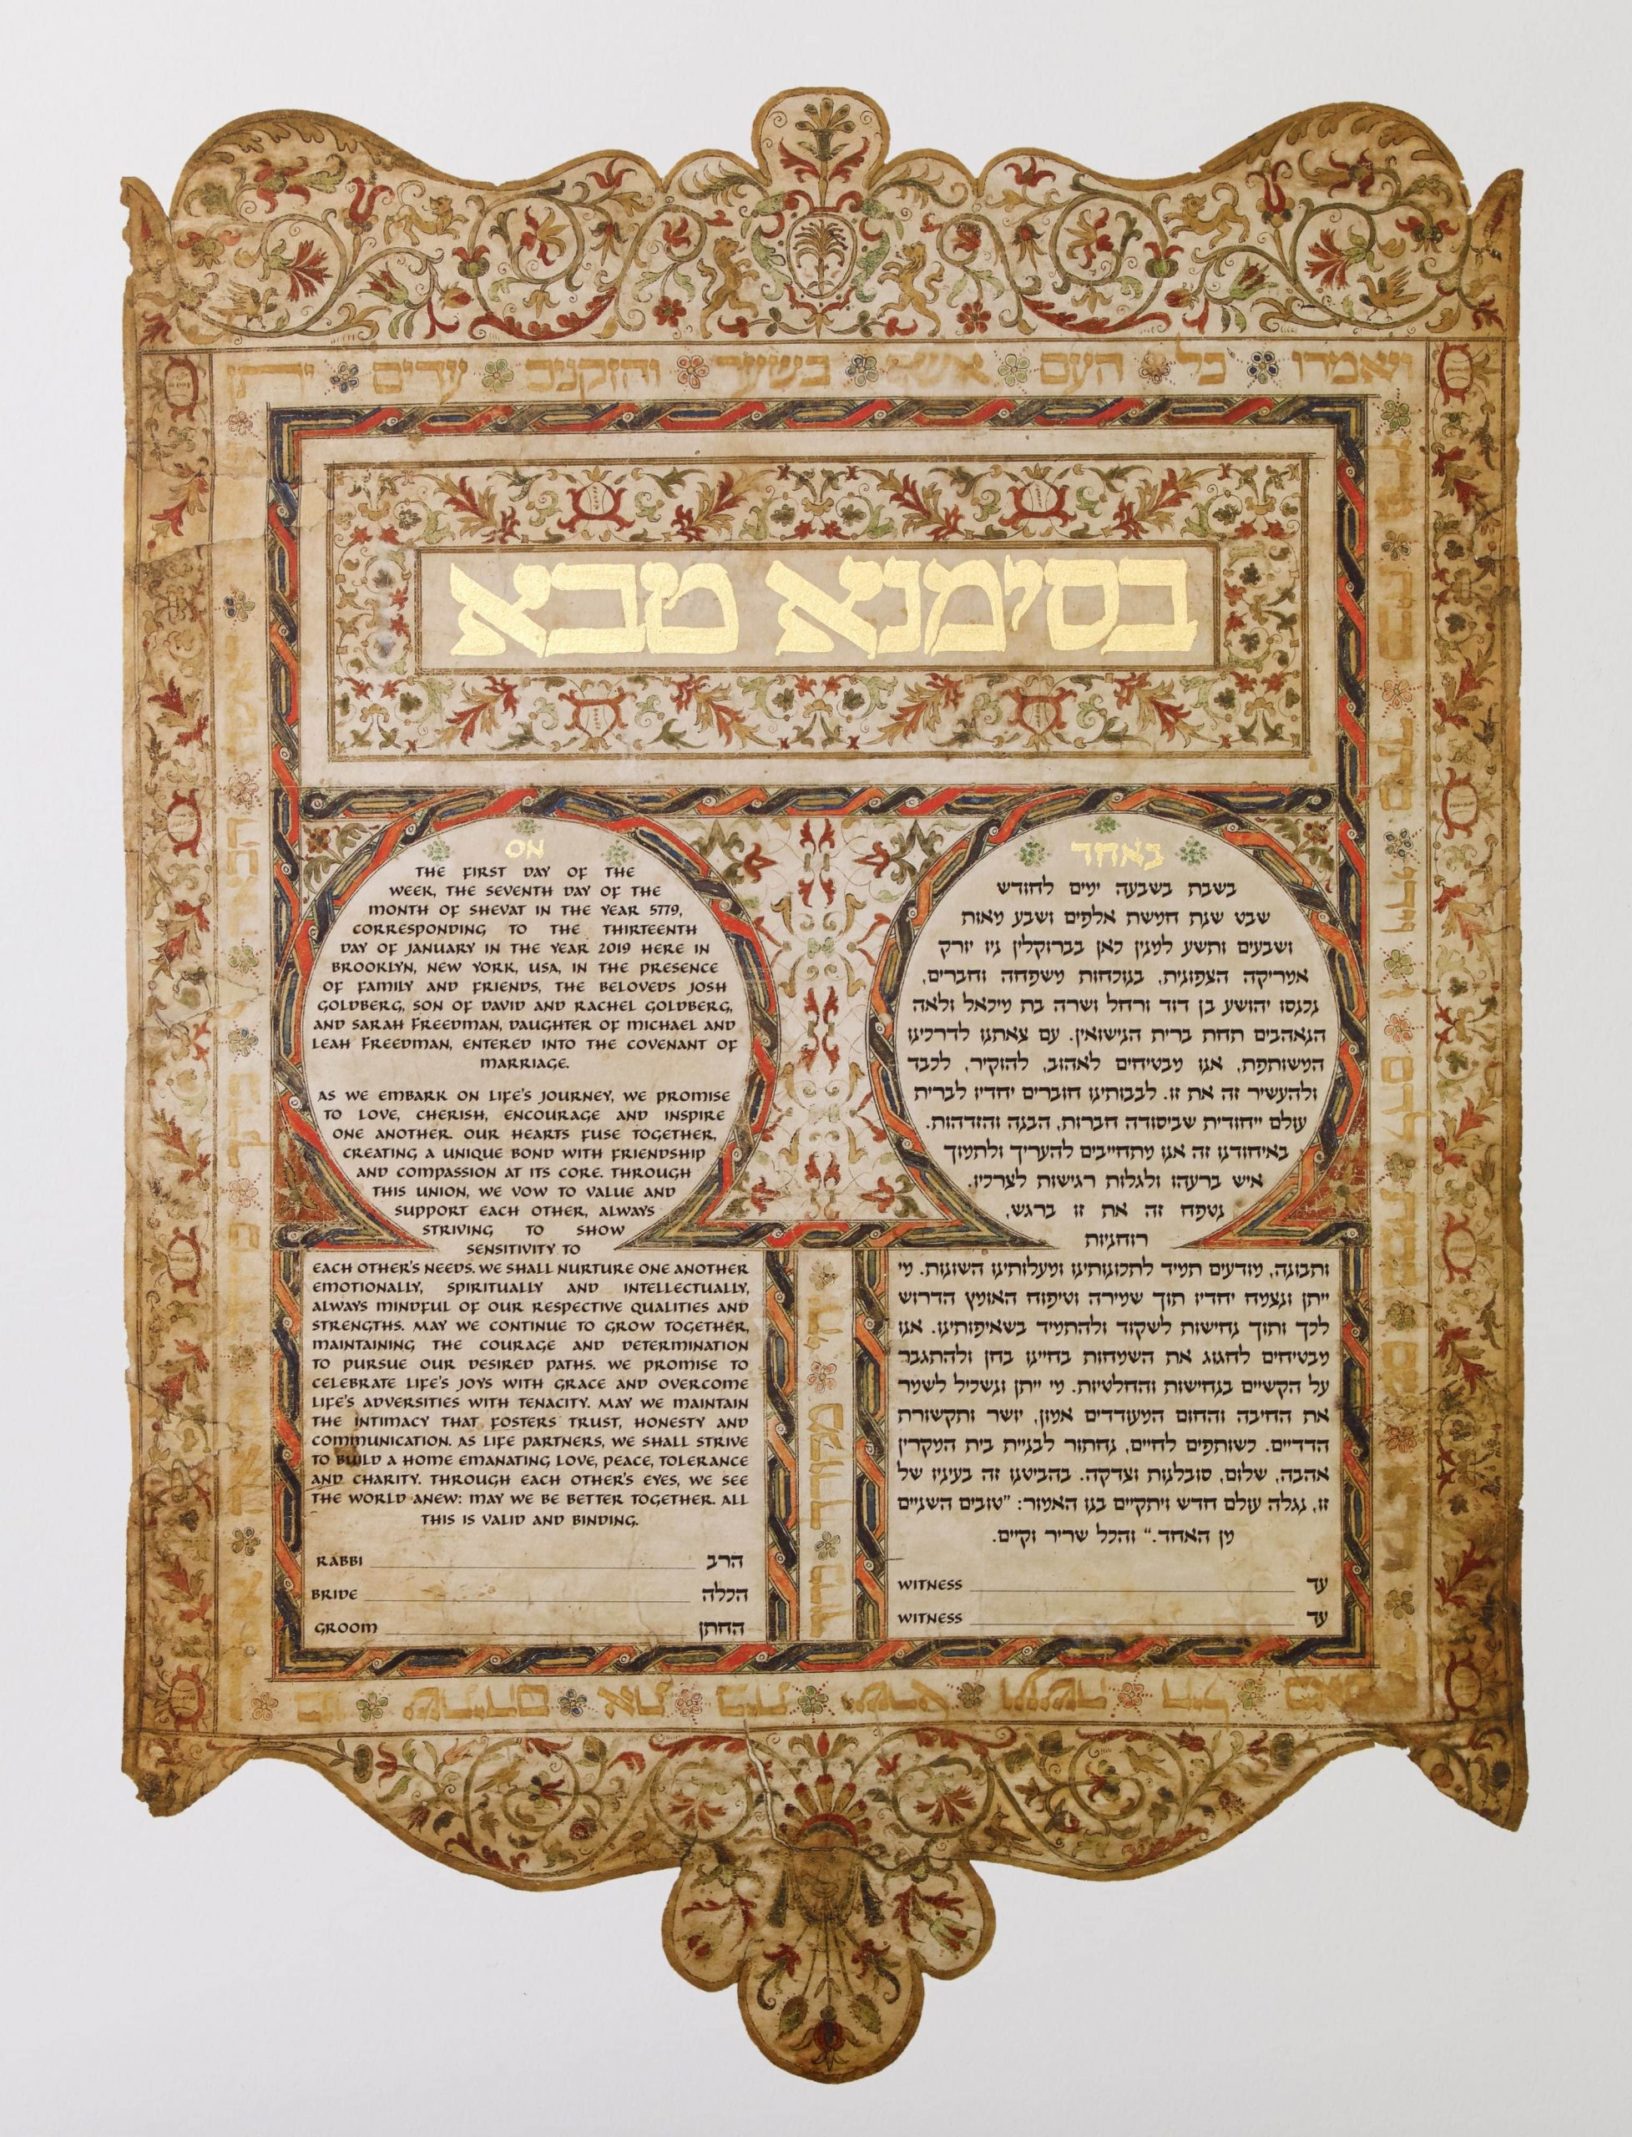 enice, Italy, 1614 - Gold Leaf Ketubah Online by The Jewish Museum